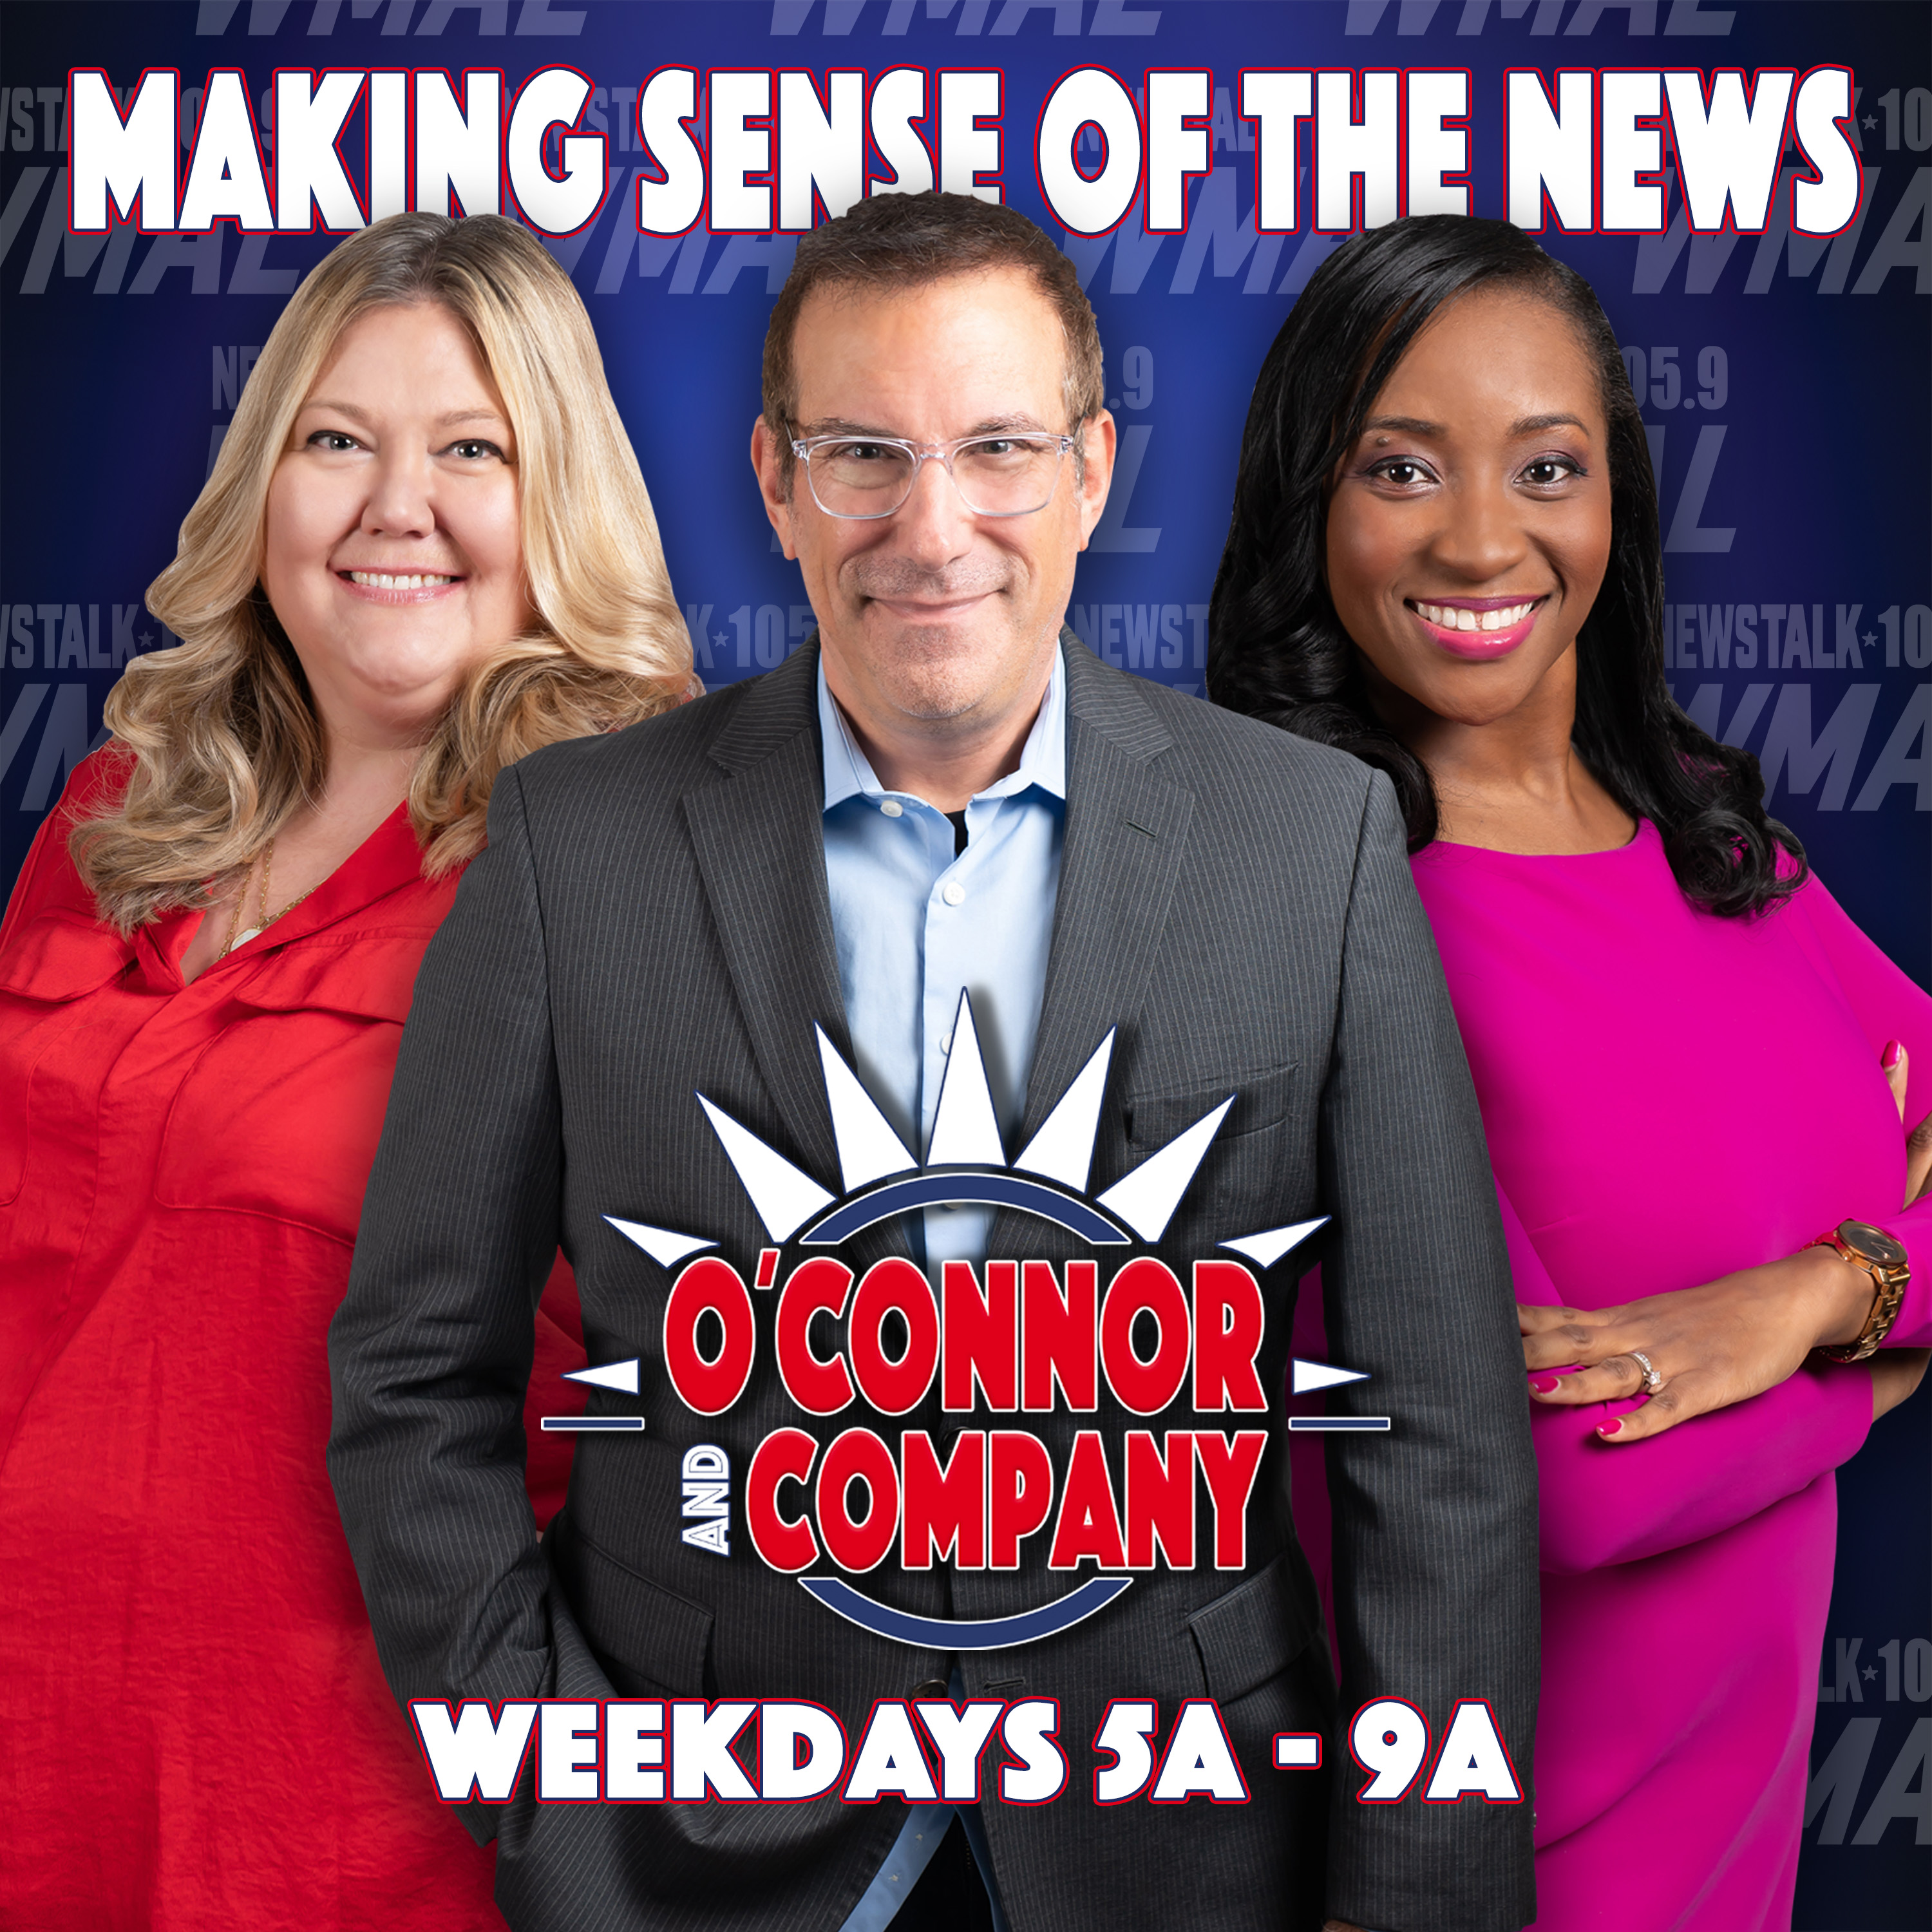 O'Connor & Company Interview - DR. MARTY MAKARY - 08.02.21